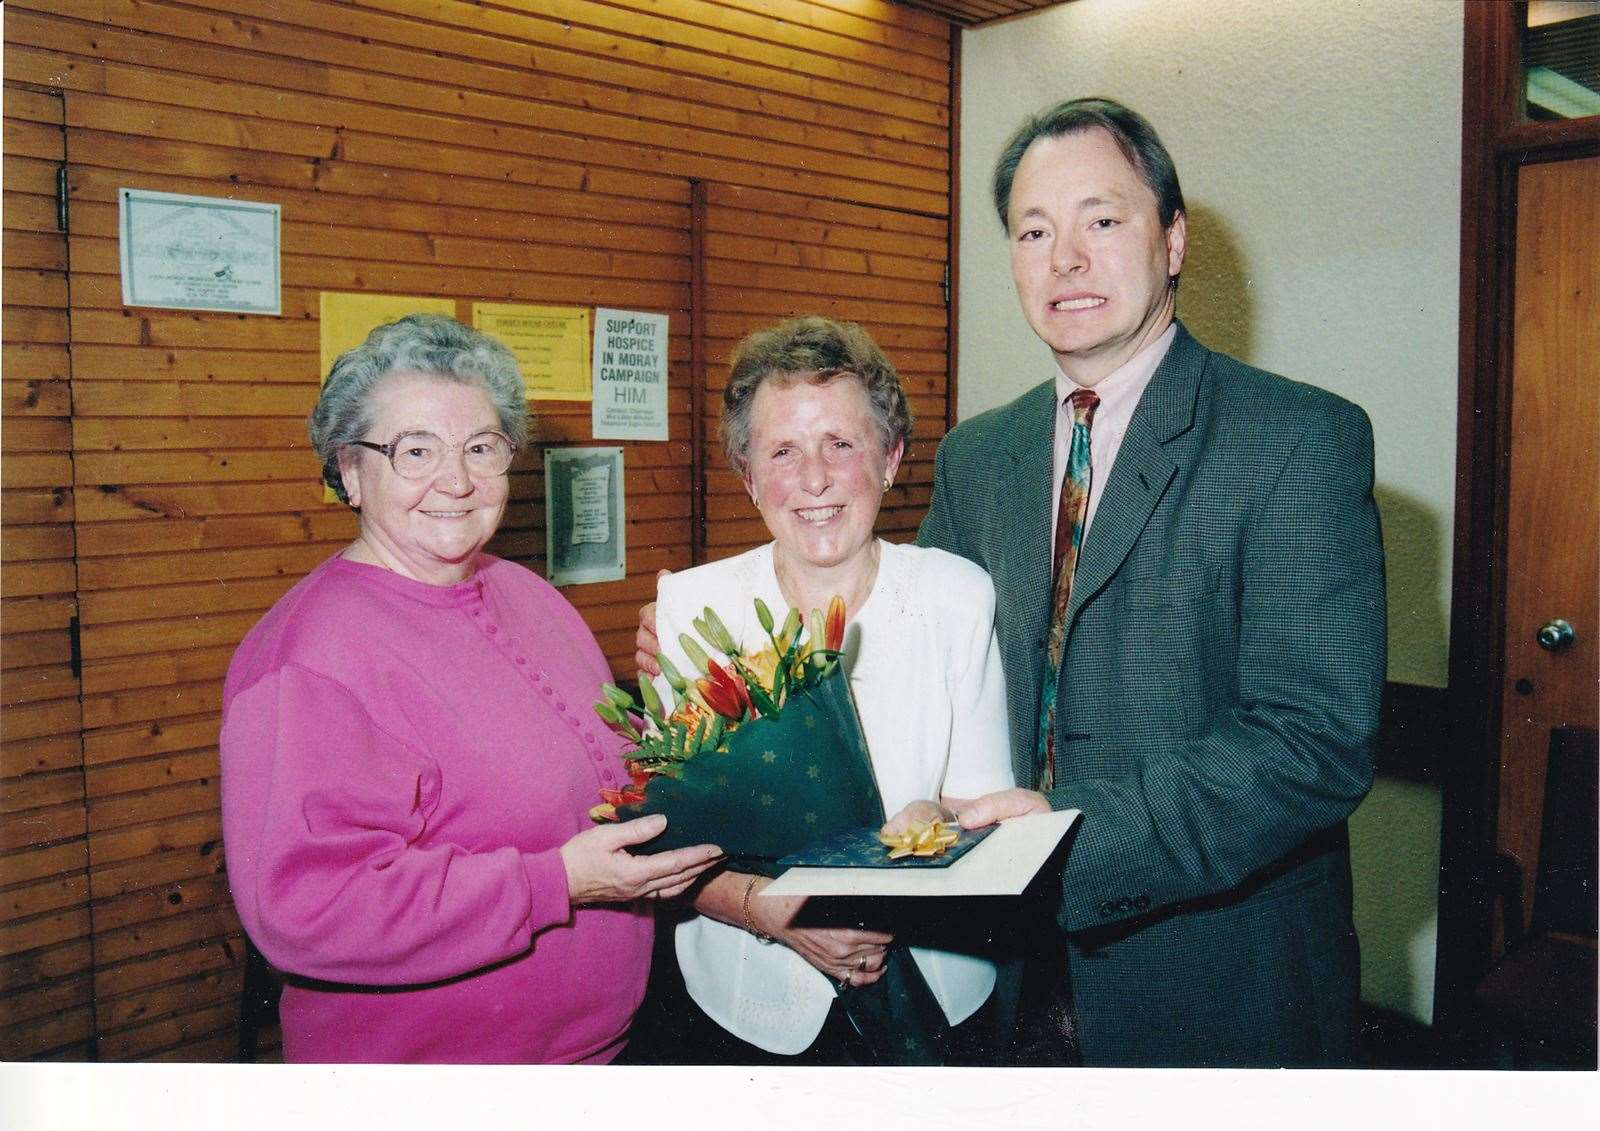 The late Betty Sutherland (left) giving flowers to Jean Mcintosh. They were both cleaners at the Centre.